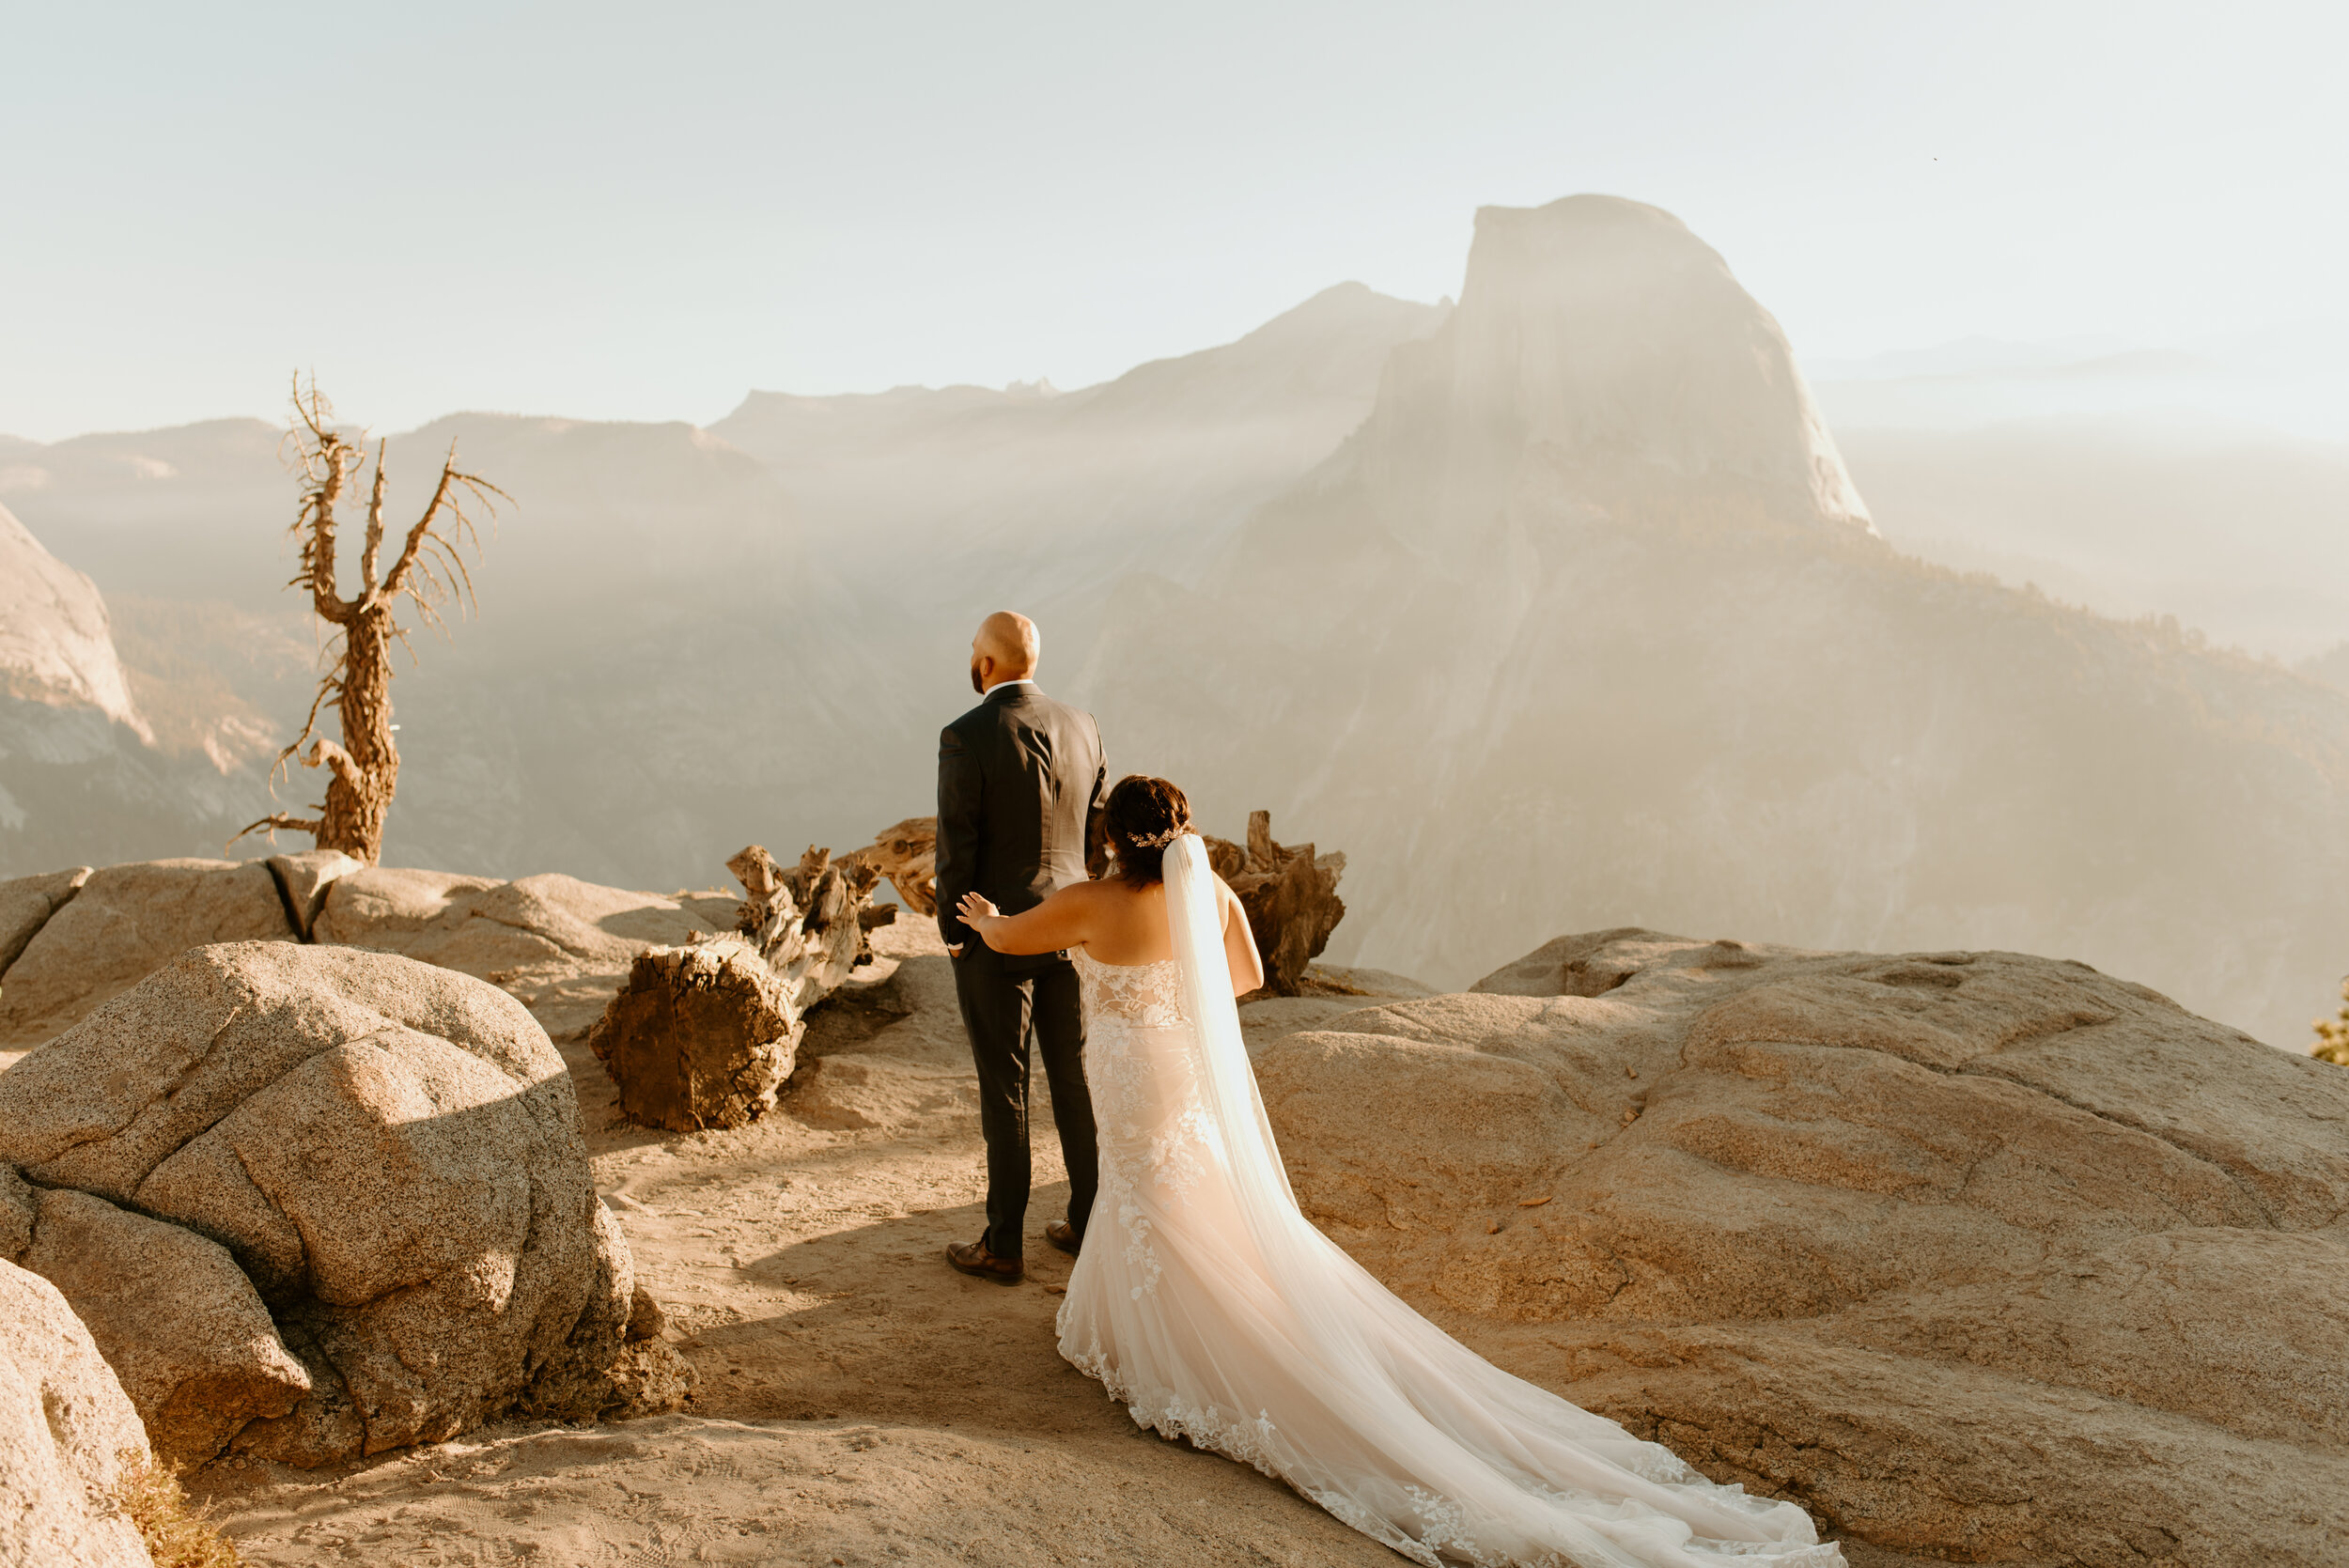 Glacier Point Elopement | Yosemite National Park Elopement and Wedding Photographer | Sunrise adventure elopement | California Elopement Photographer | First Look